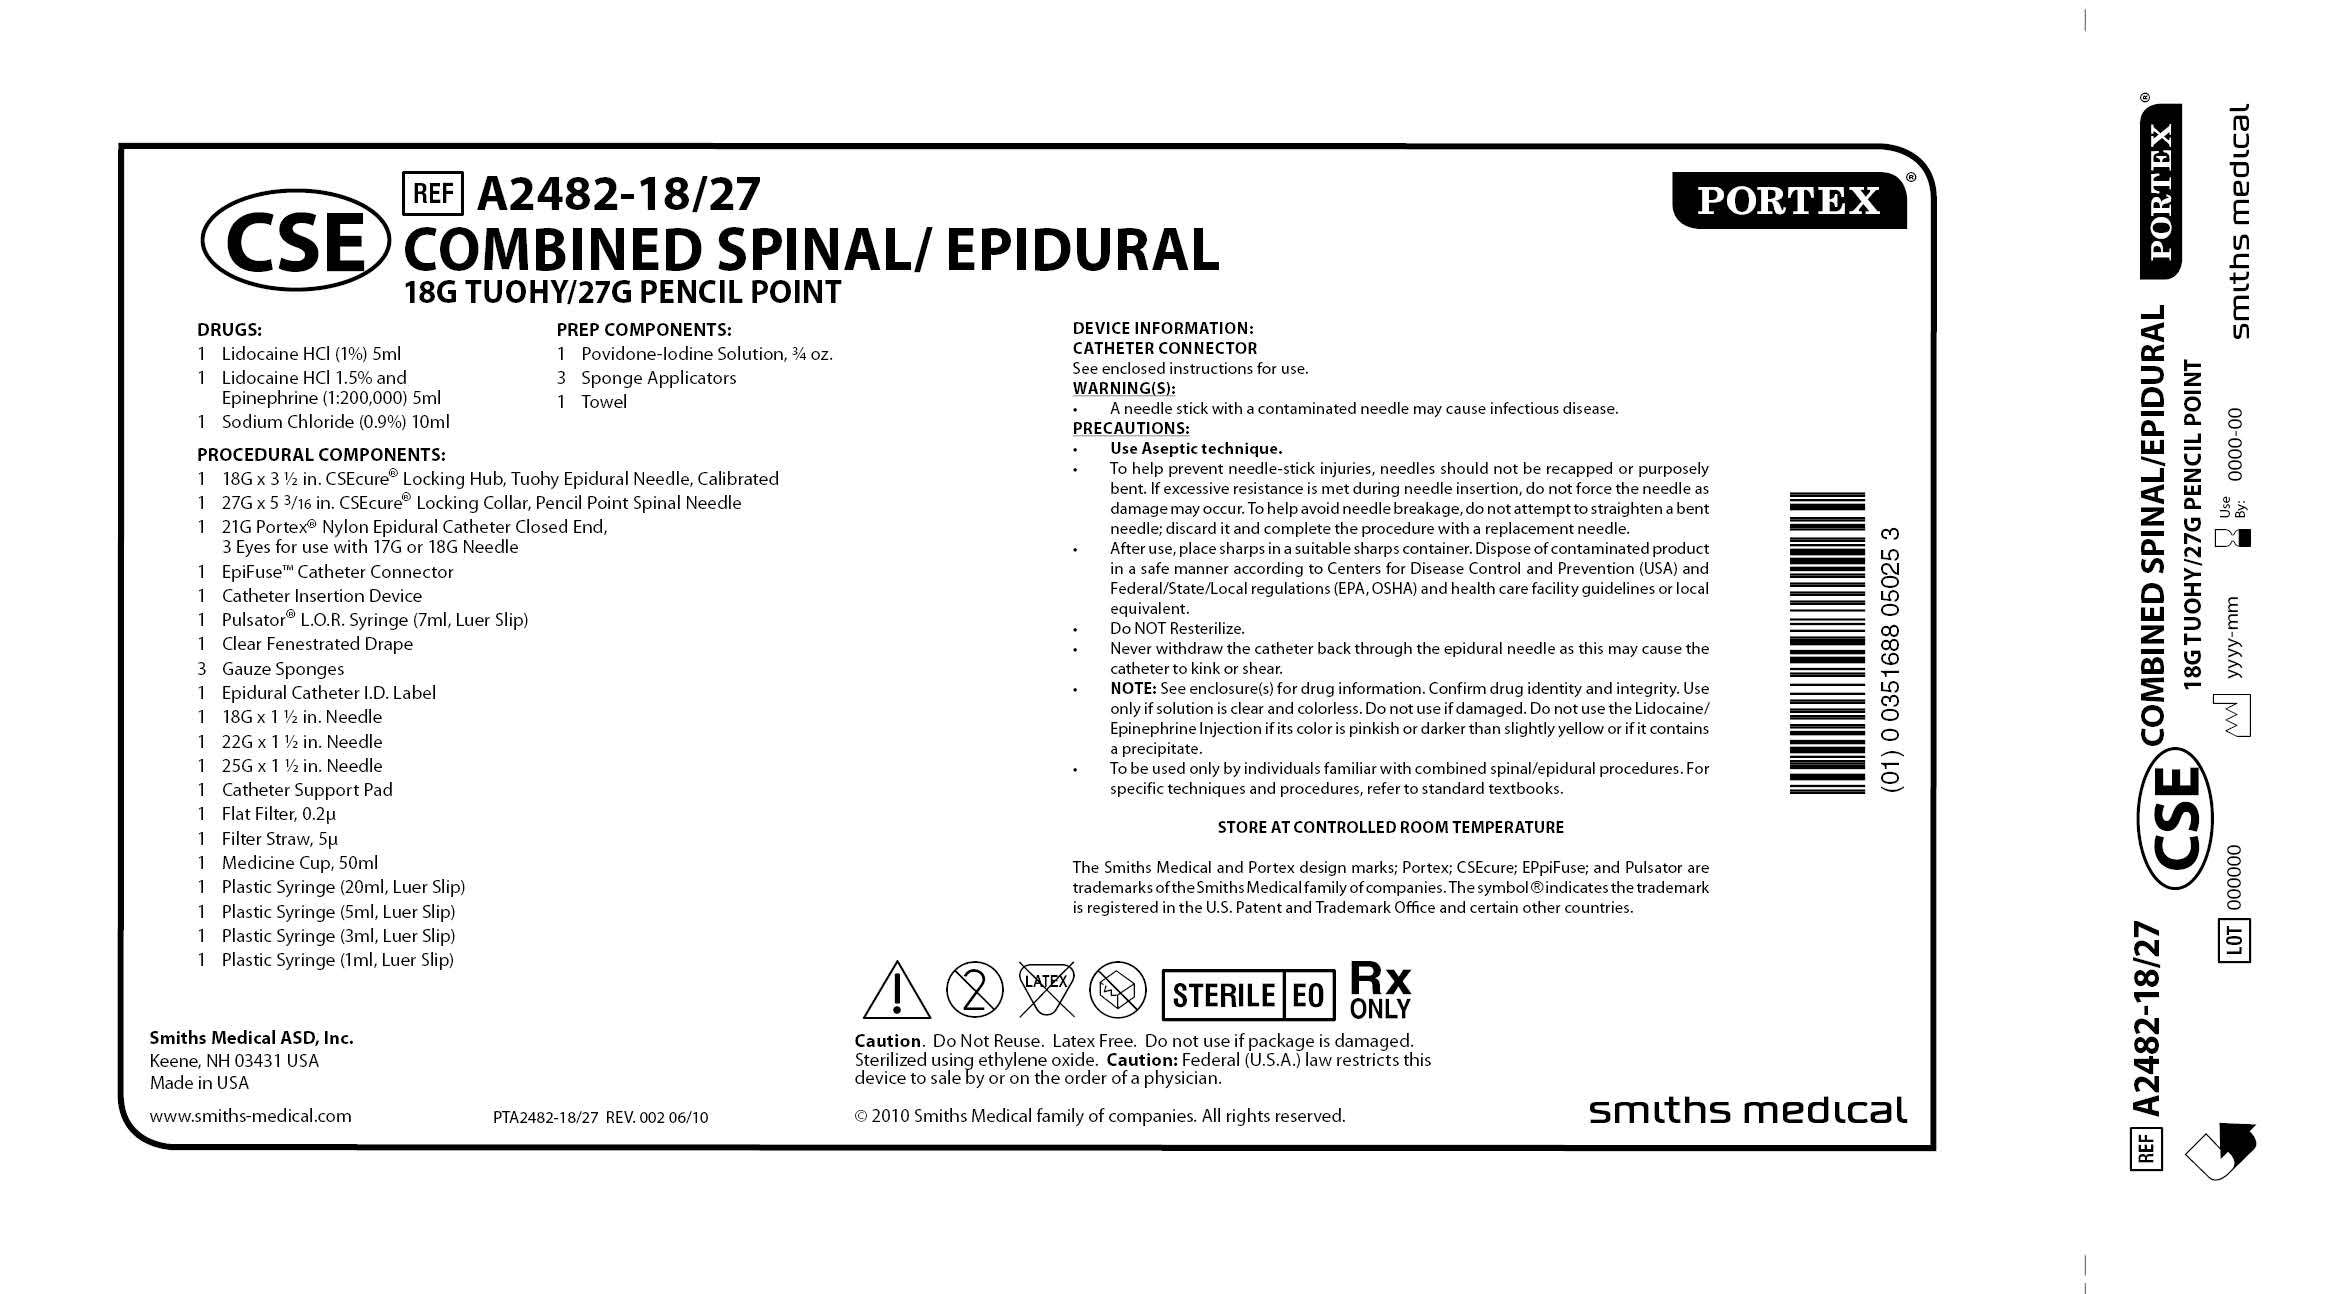 A2482-18/27 COMBINED SPINAL/EPIDURAL 18G TUOHY/27G PENCIL POINT